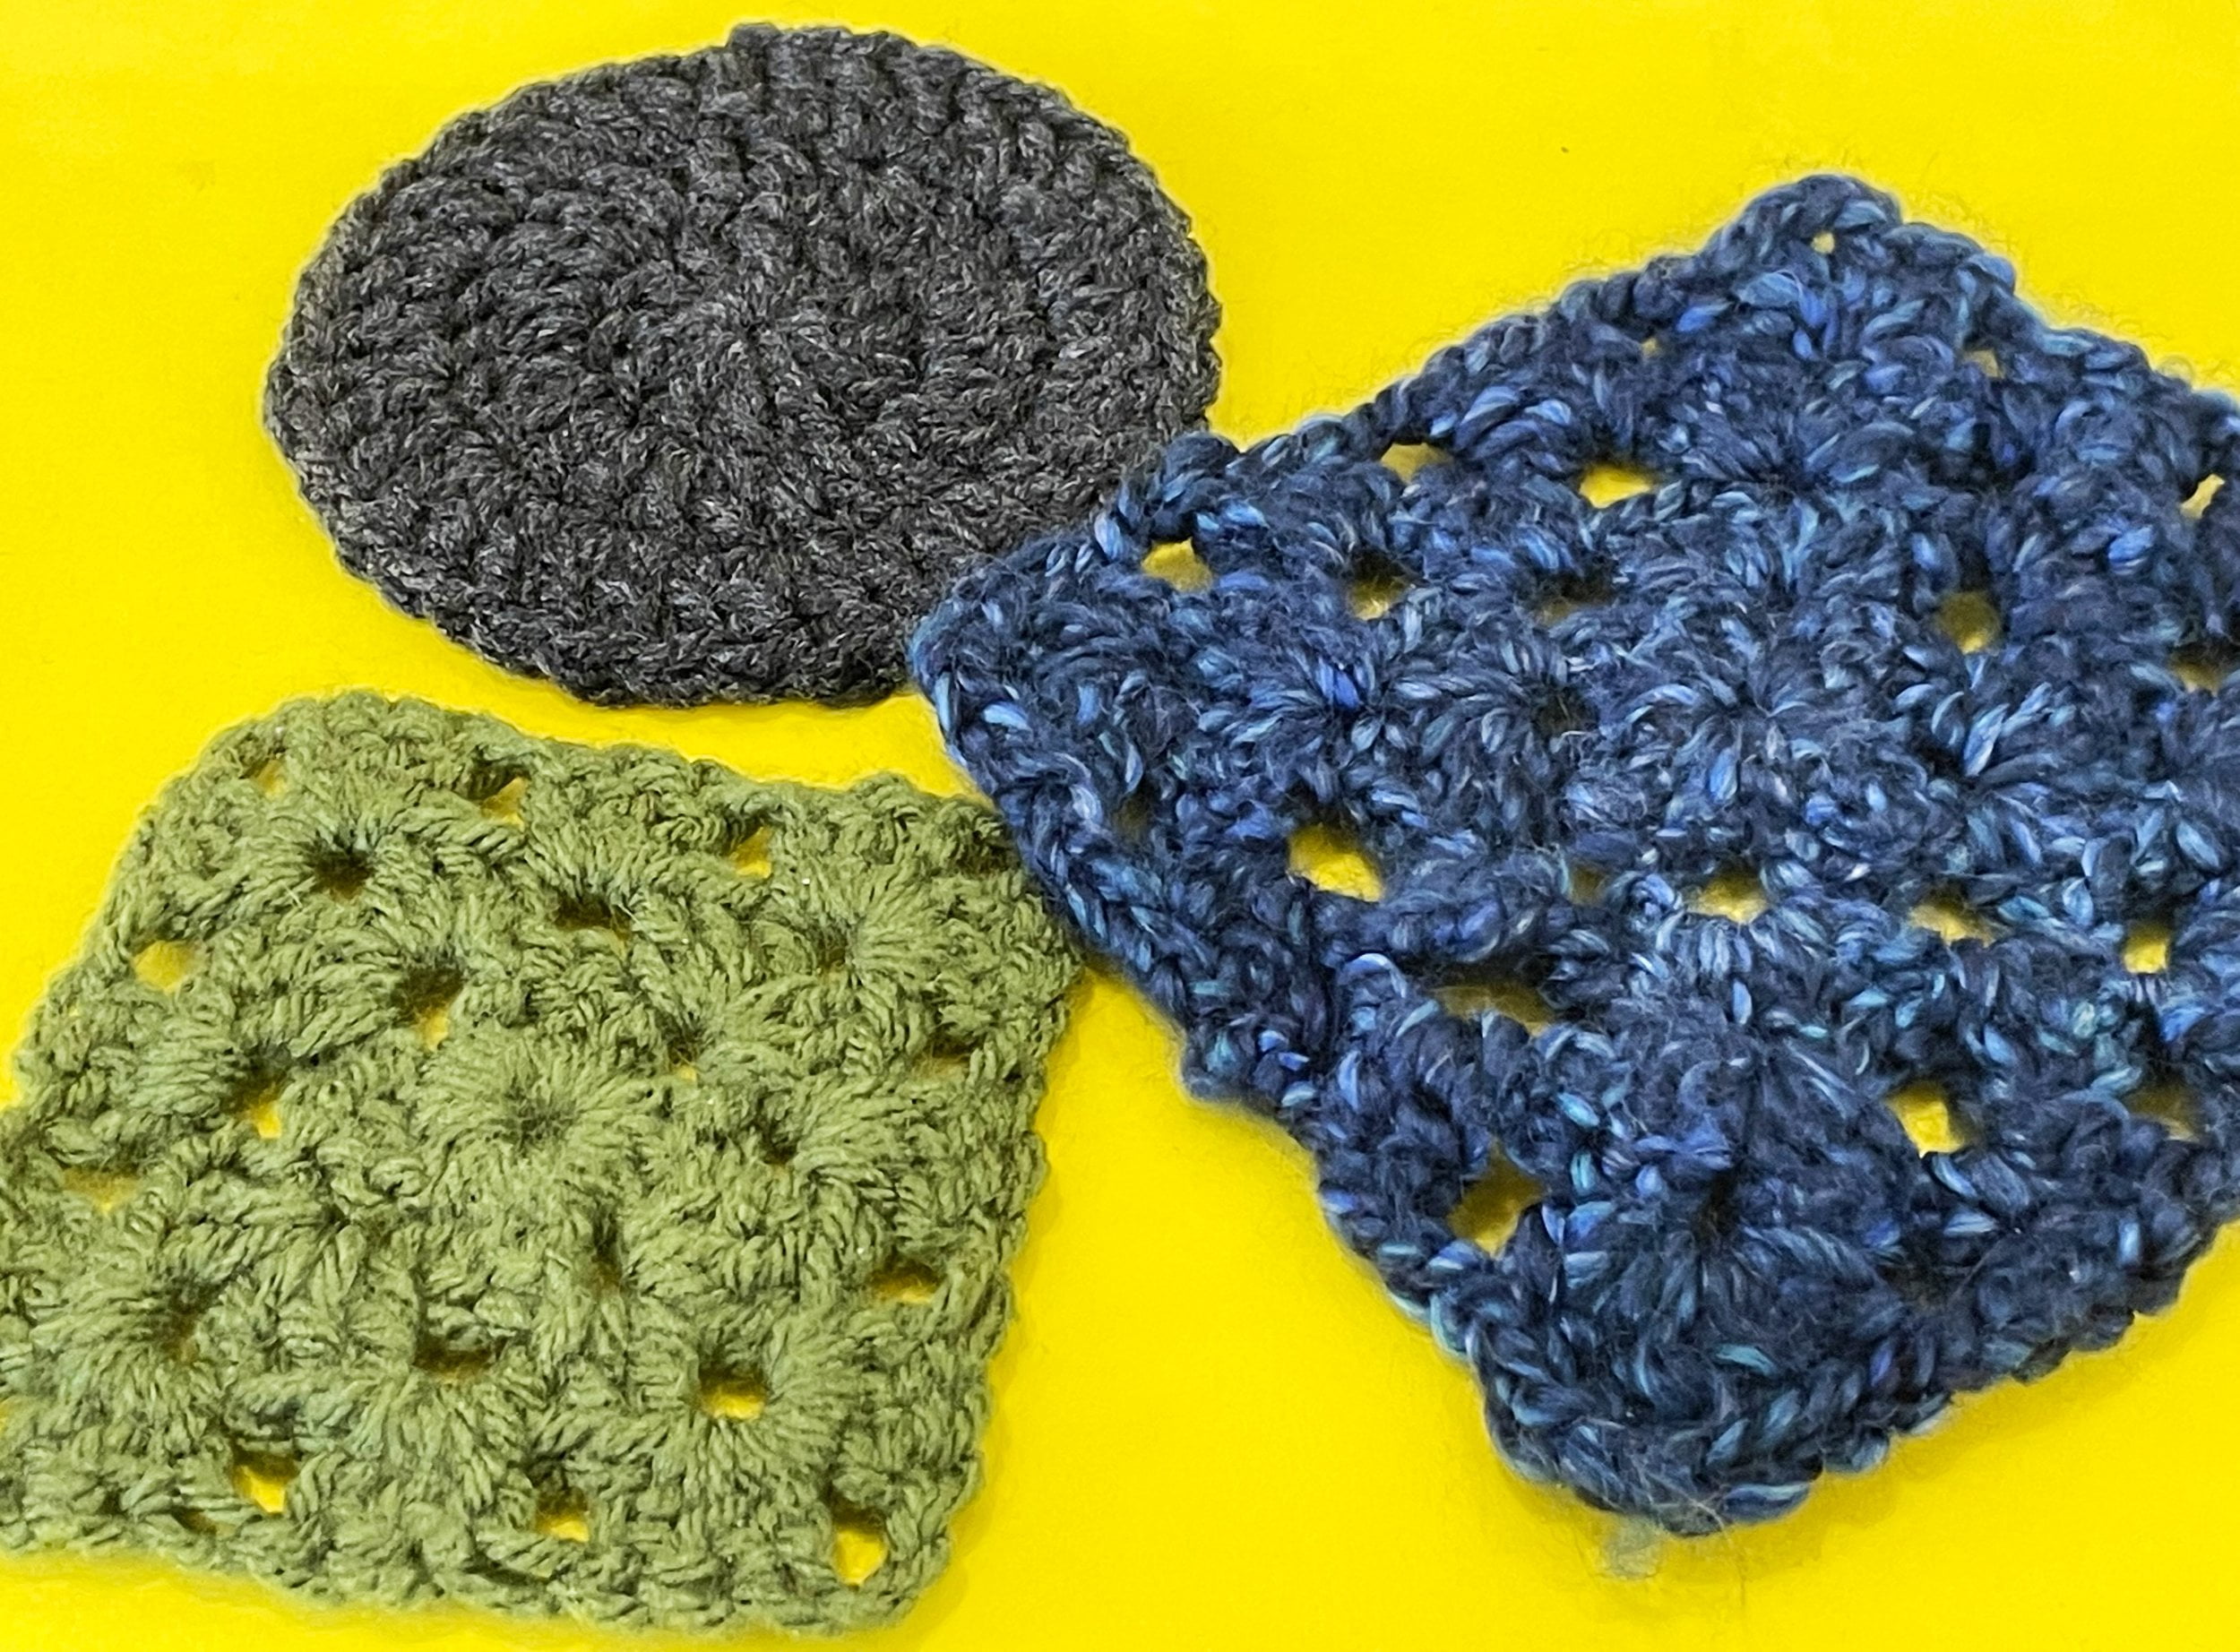 Image of crochet coasters on a yellow backdrop for KinoSaito Crochet Workshop